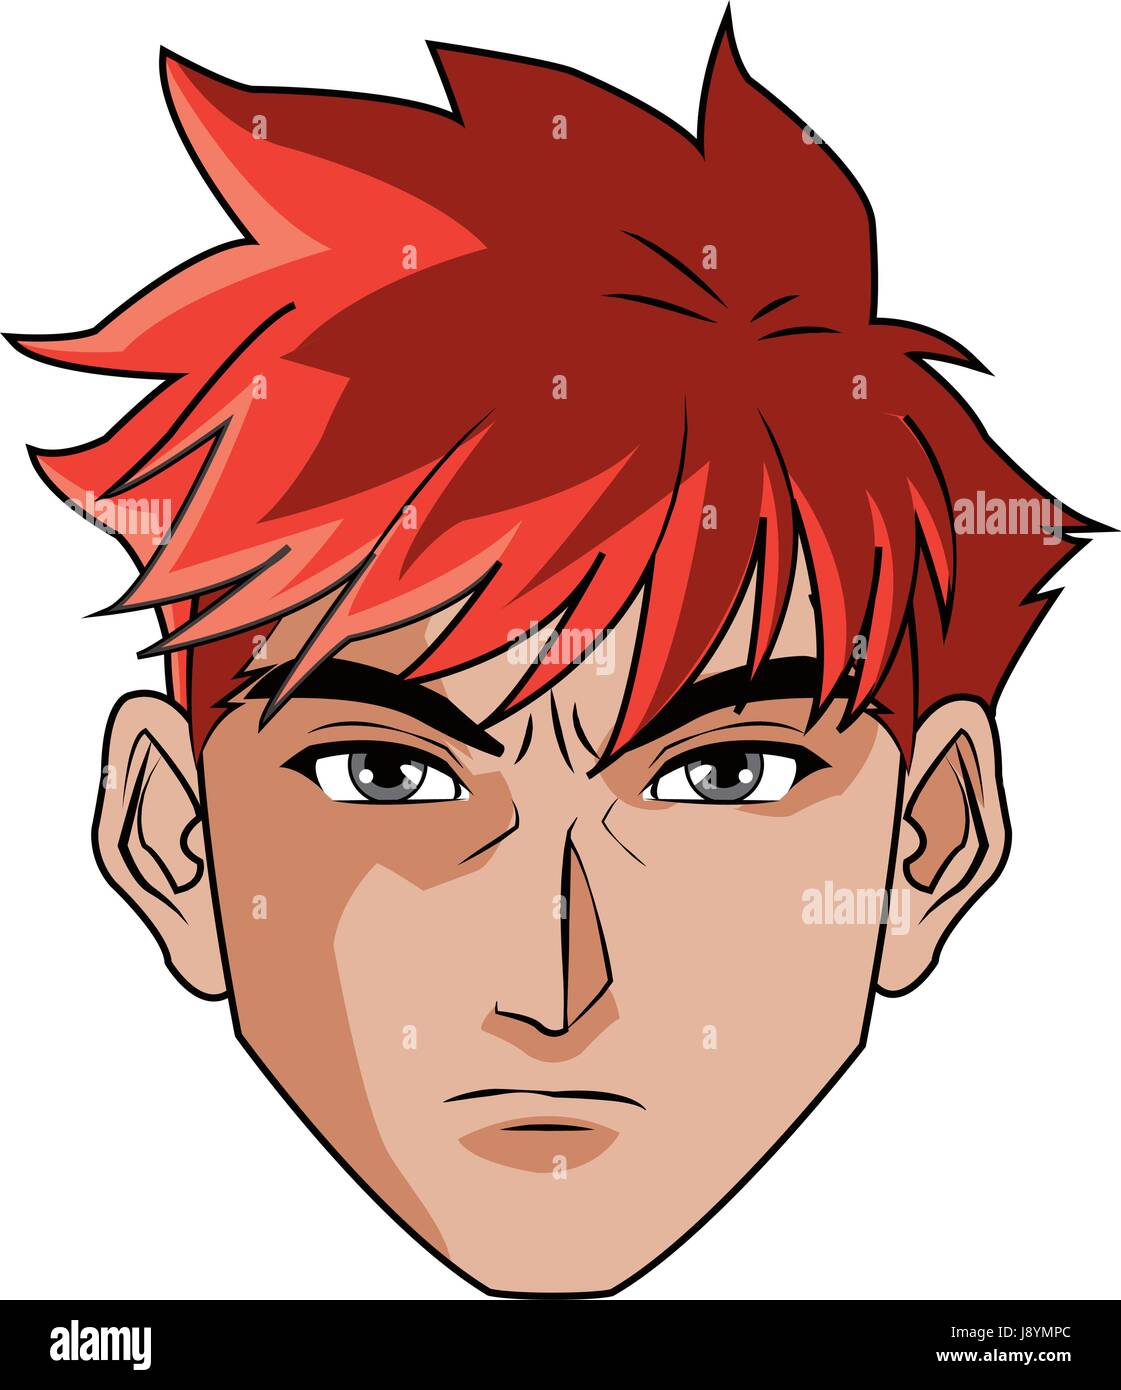 Draw Male Face (ANIME) : 4 Steps - Instructables